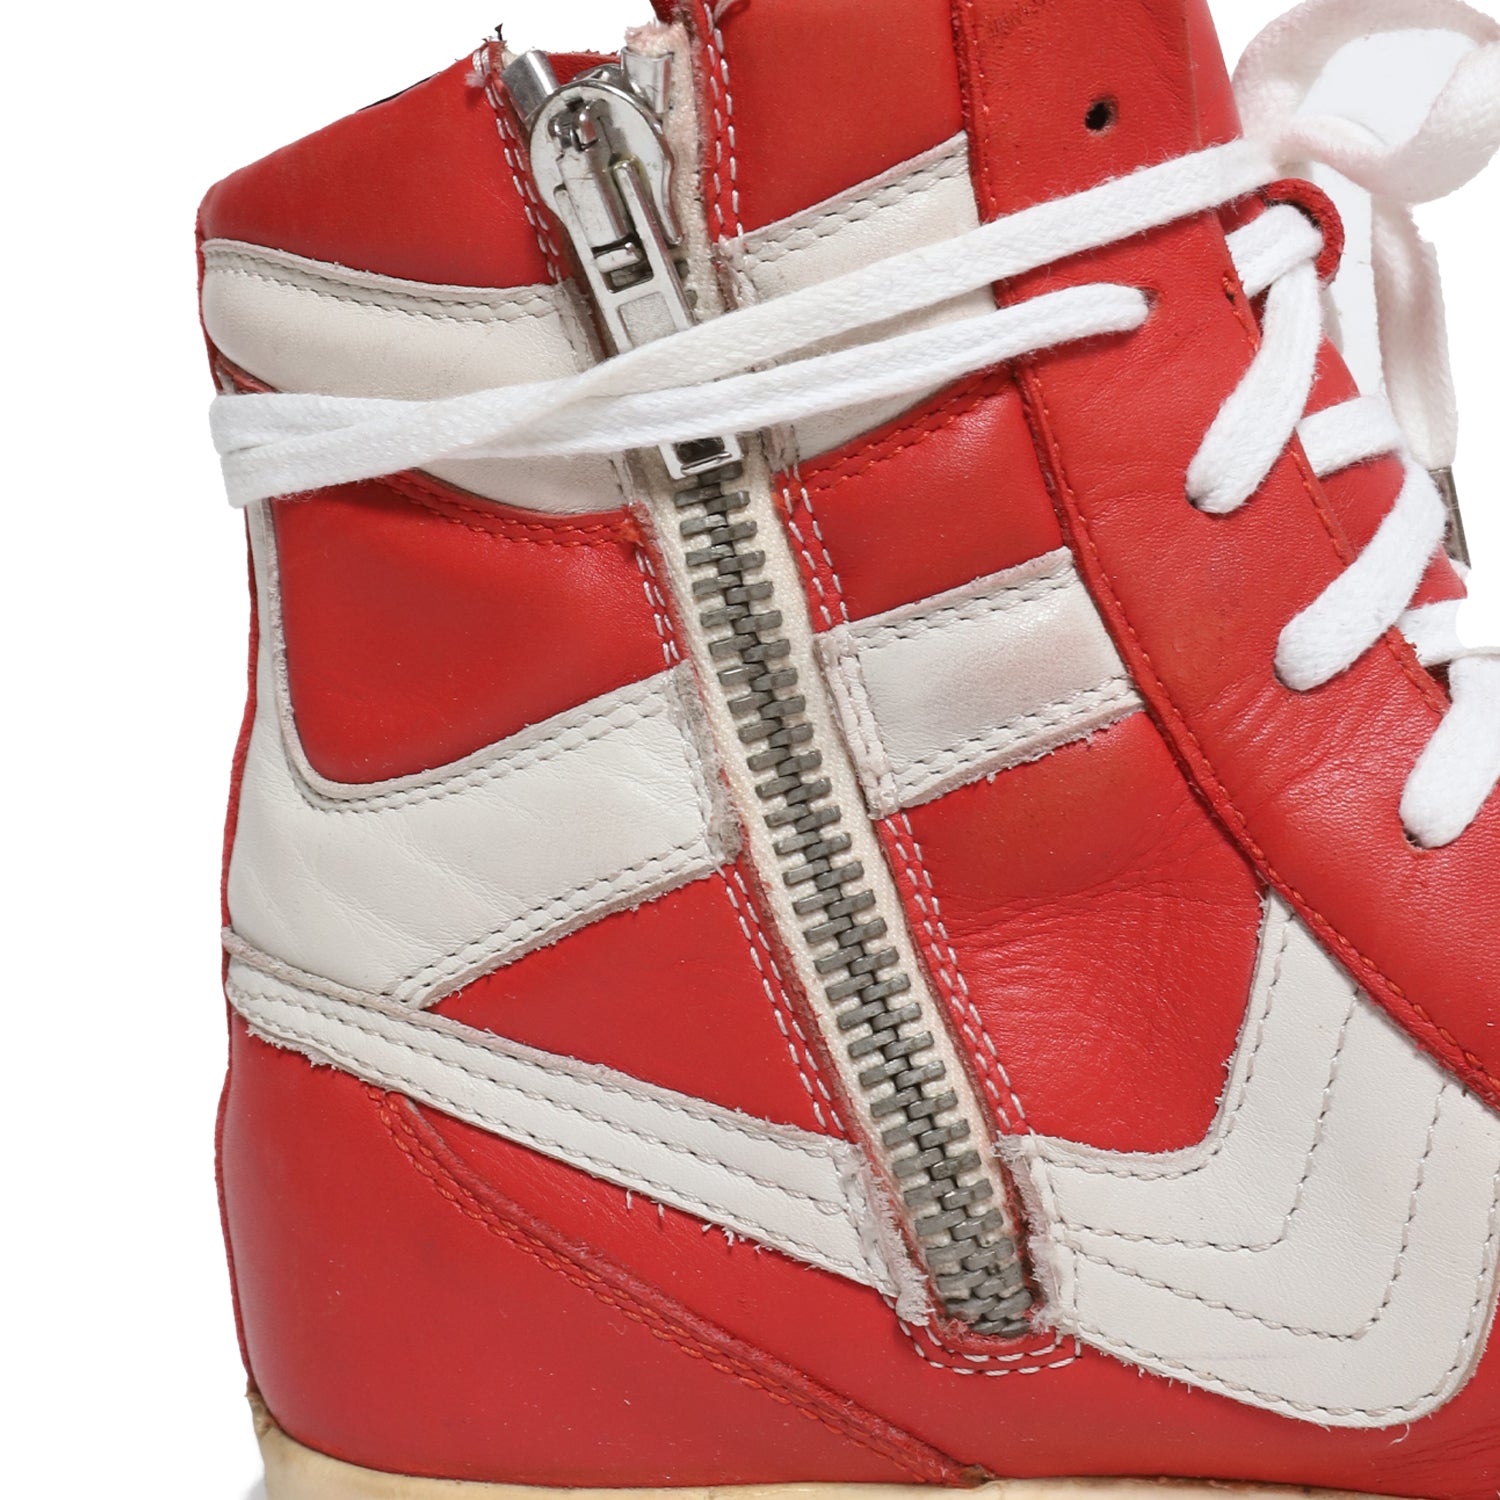 Rick Owens 2009 1of1 Red Prototype Dunks